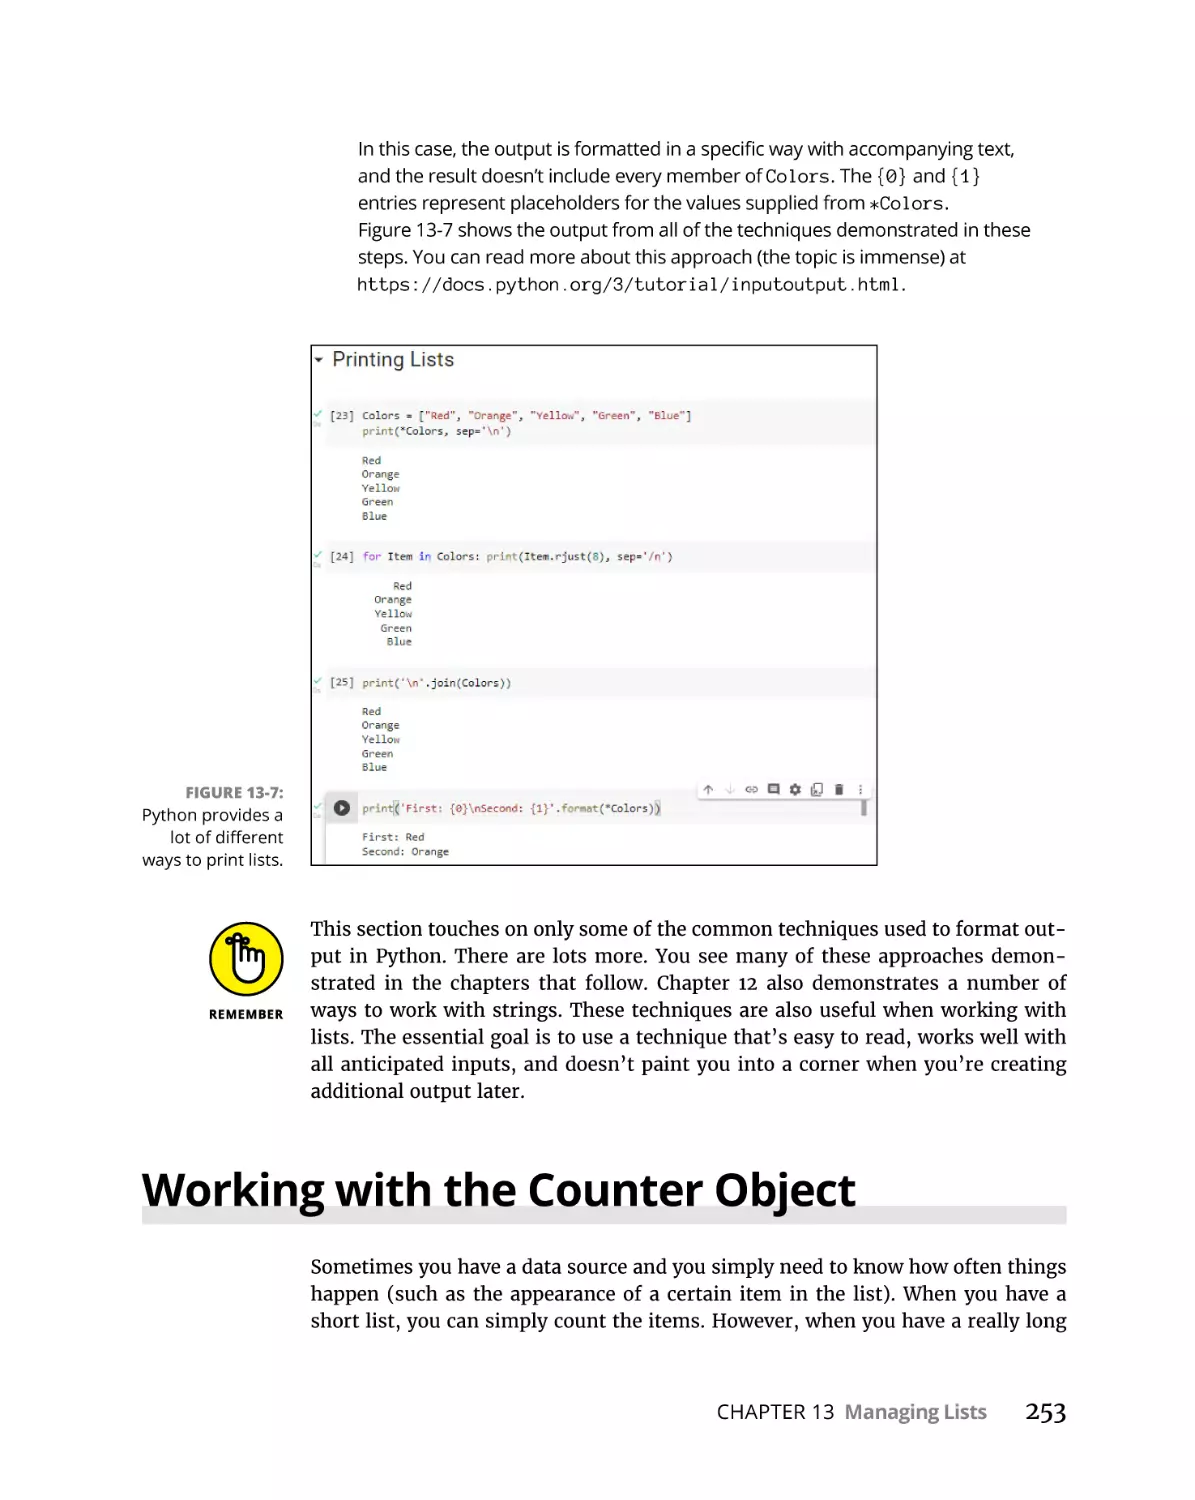 Working with the Counter Object